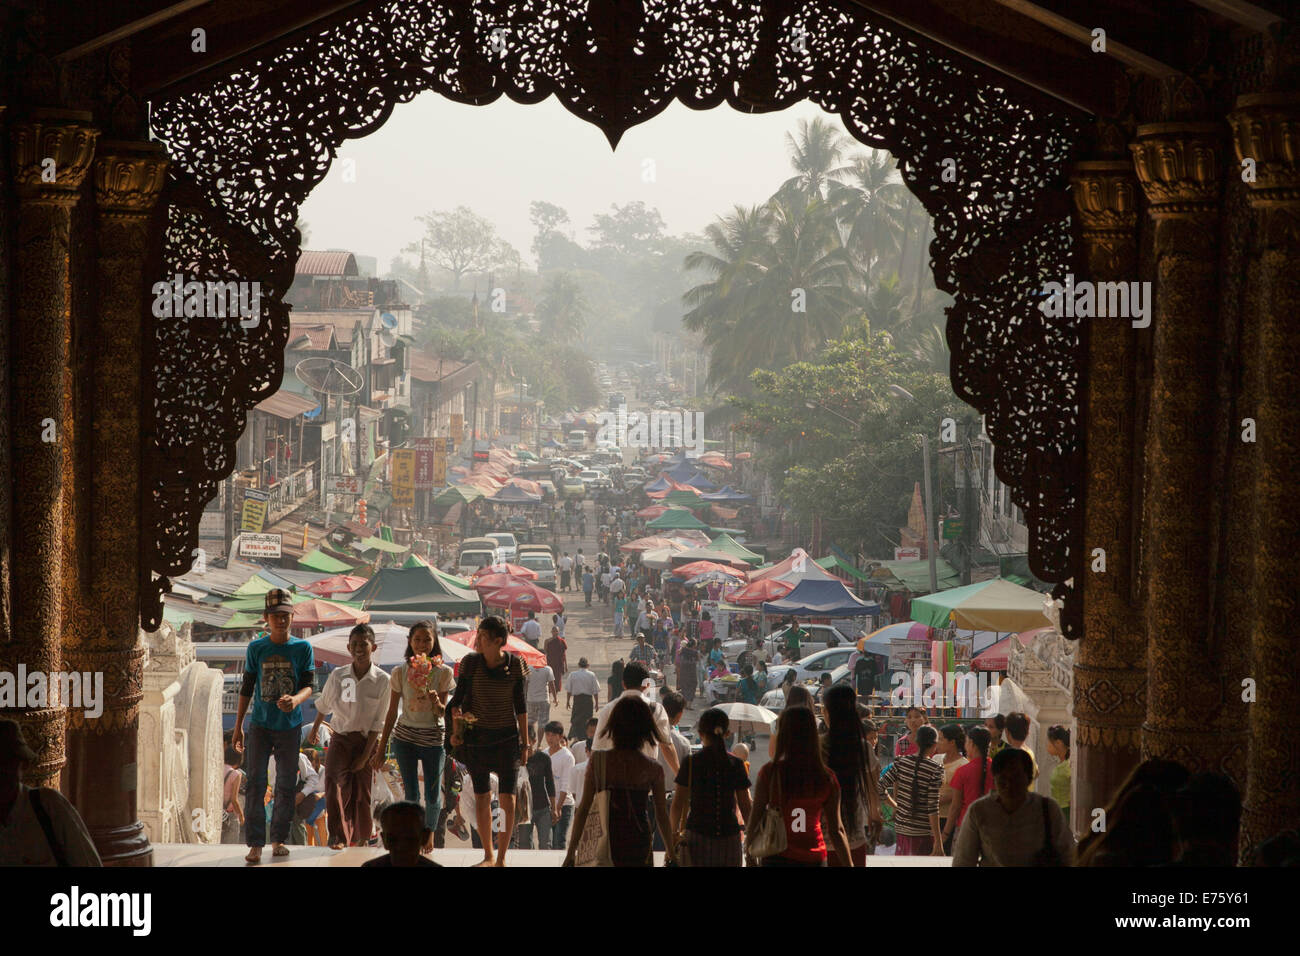 Temple exit, transition into a hectic city life, Yangon, Myanmar Stock Photo